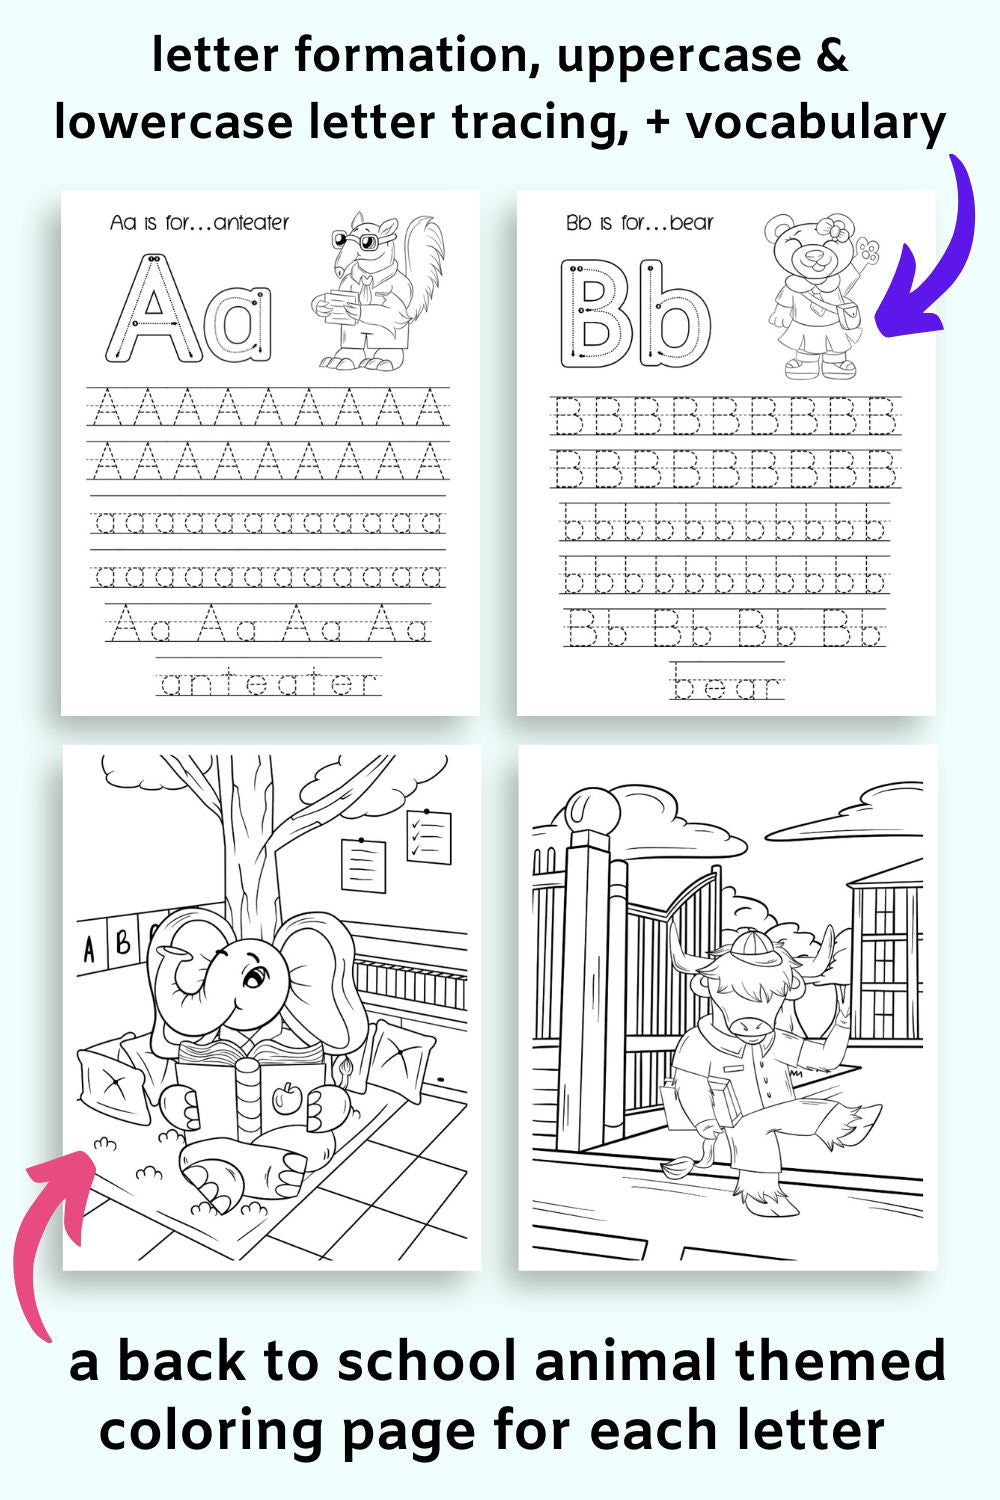 a preview of four interior pages from an alphabet tracing and coloring book with a back to school animal theme